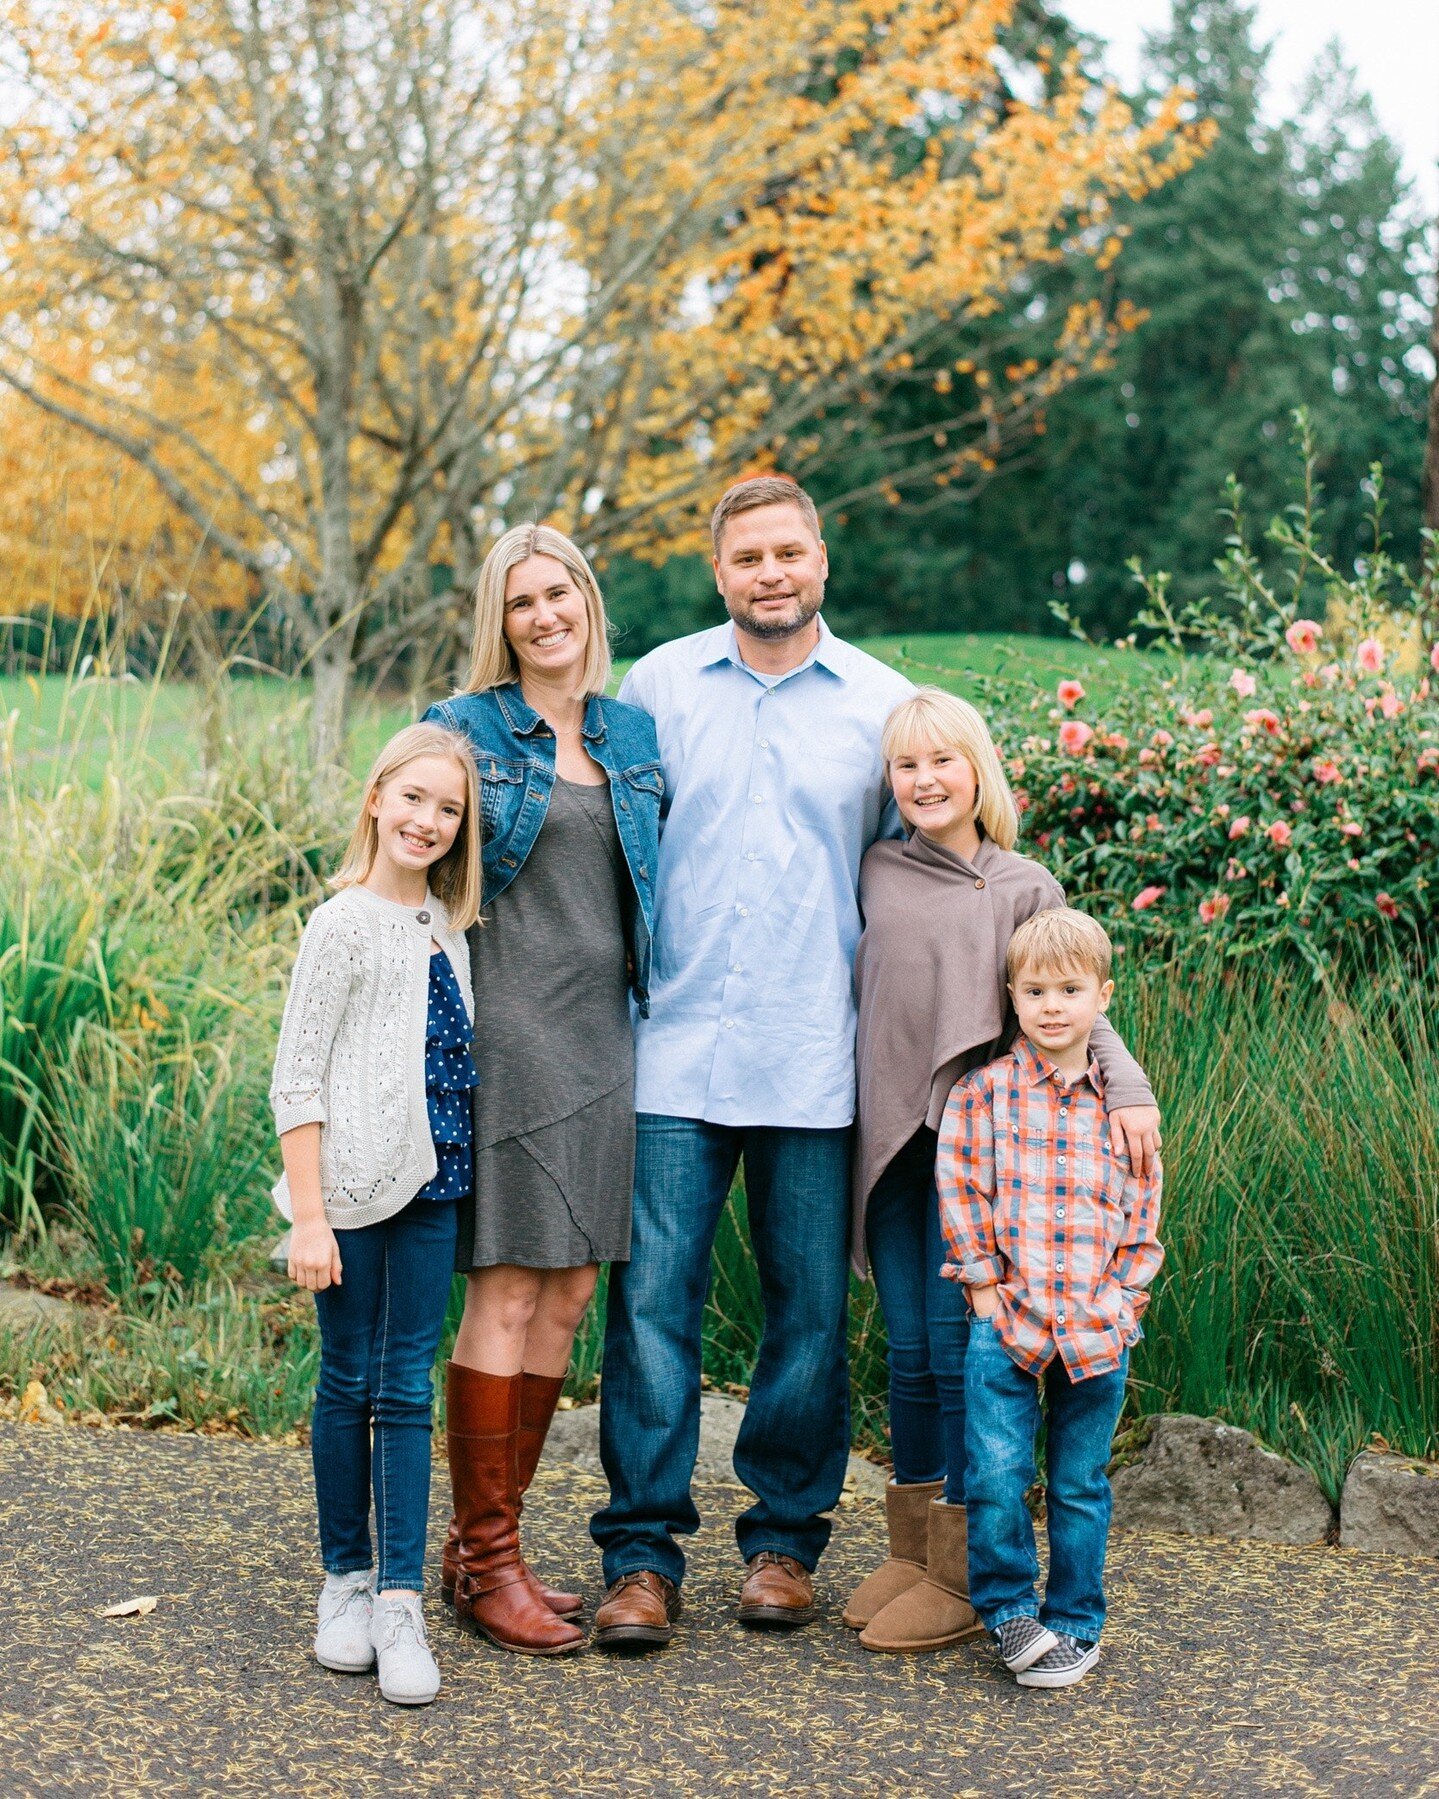 Fall foliage season is always my favorite time to photograph families. Love this sweet little fam.